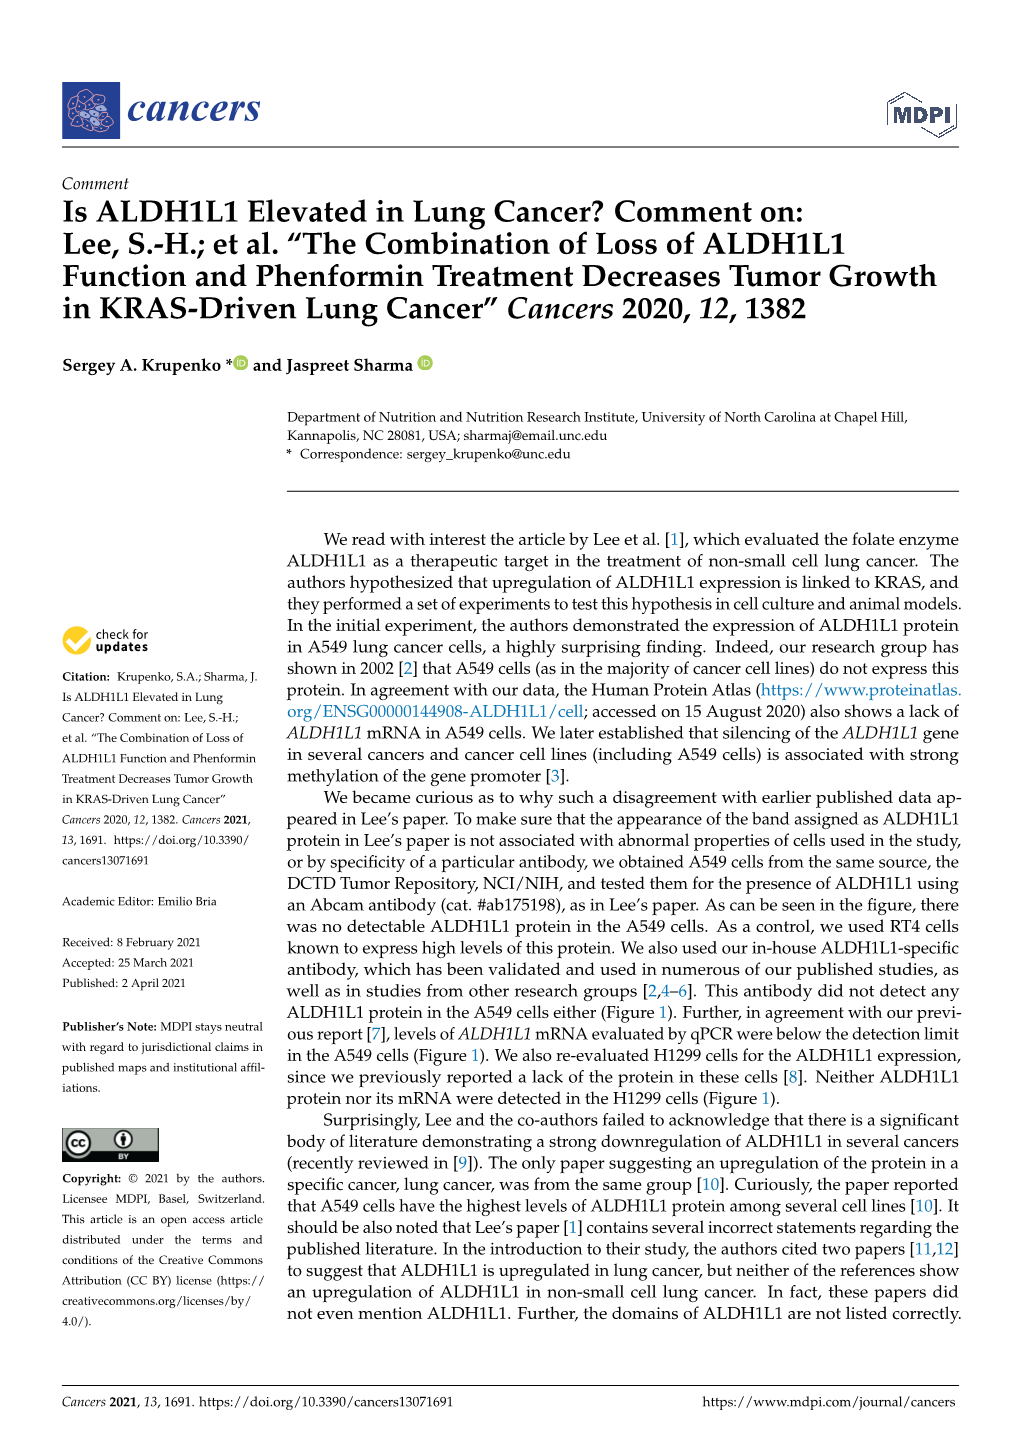 Is ALDH1L1 Elevated in Lung Cancer? Comment On: Lee, S.-H.; Et Al